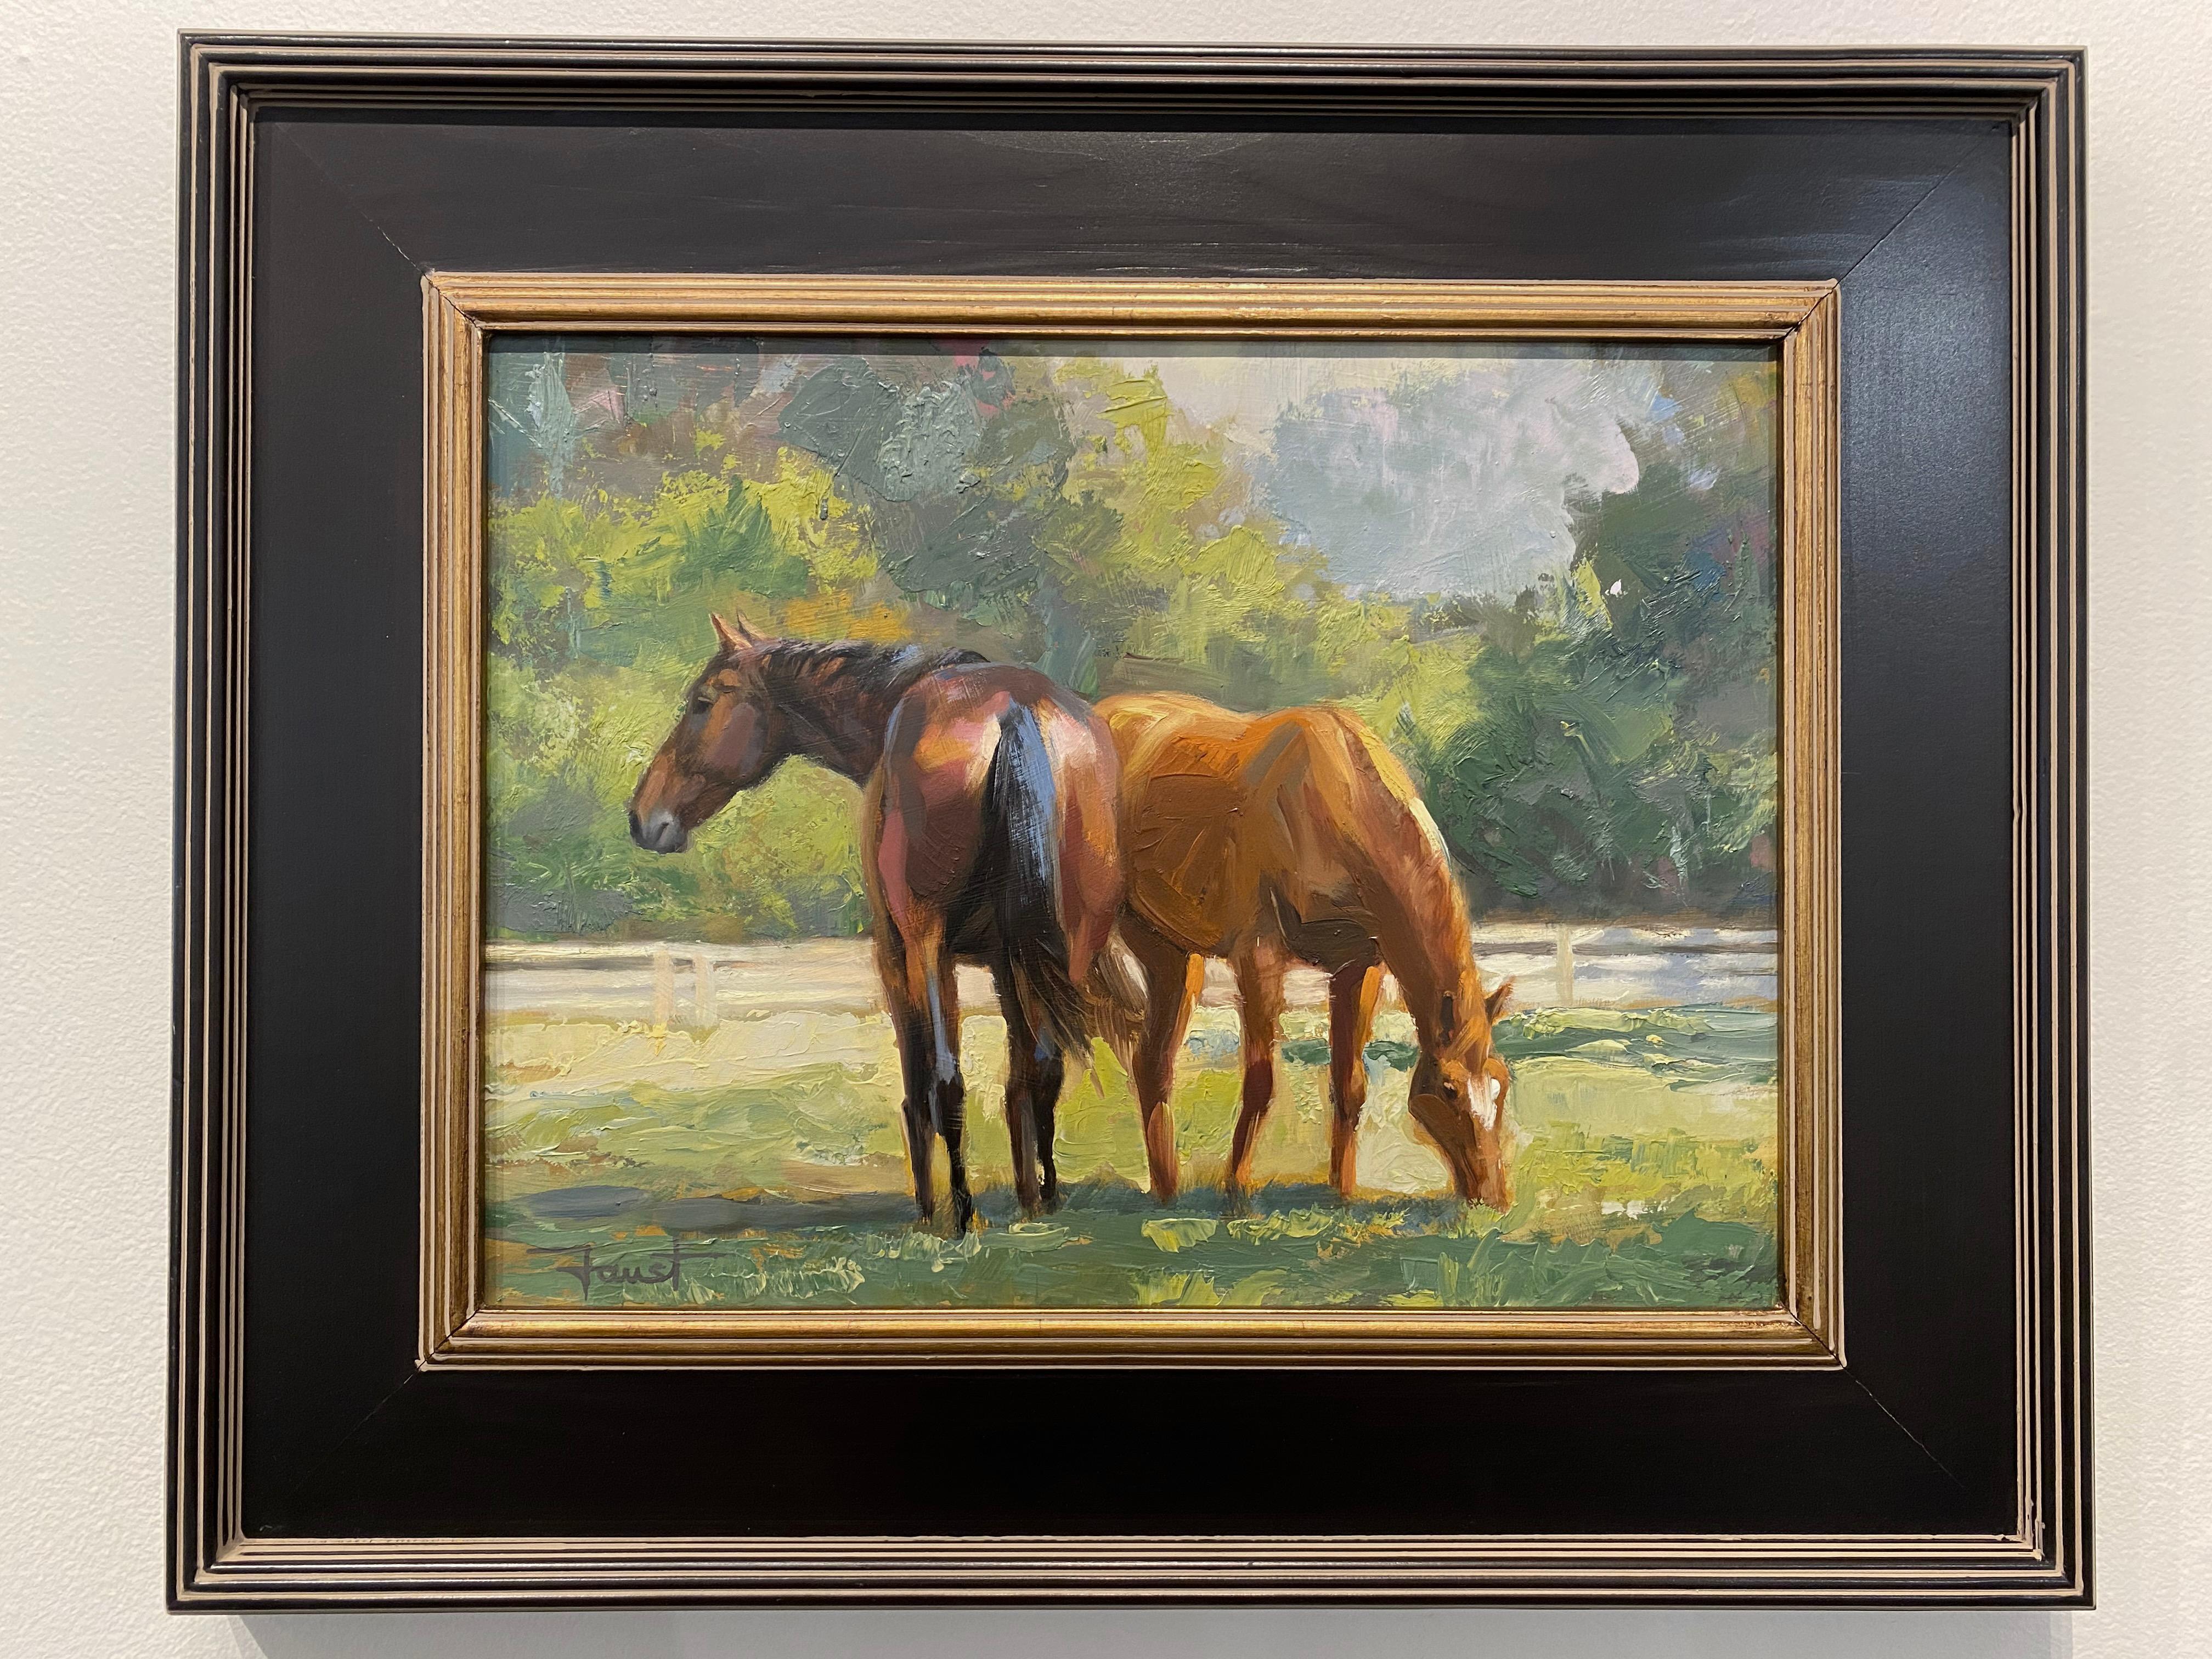 horses painting